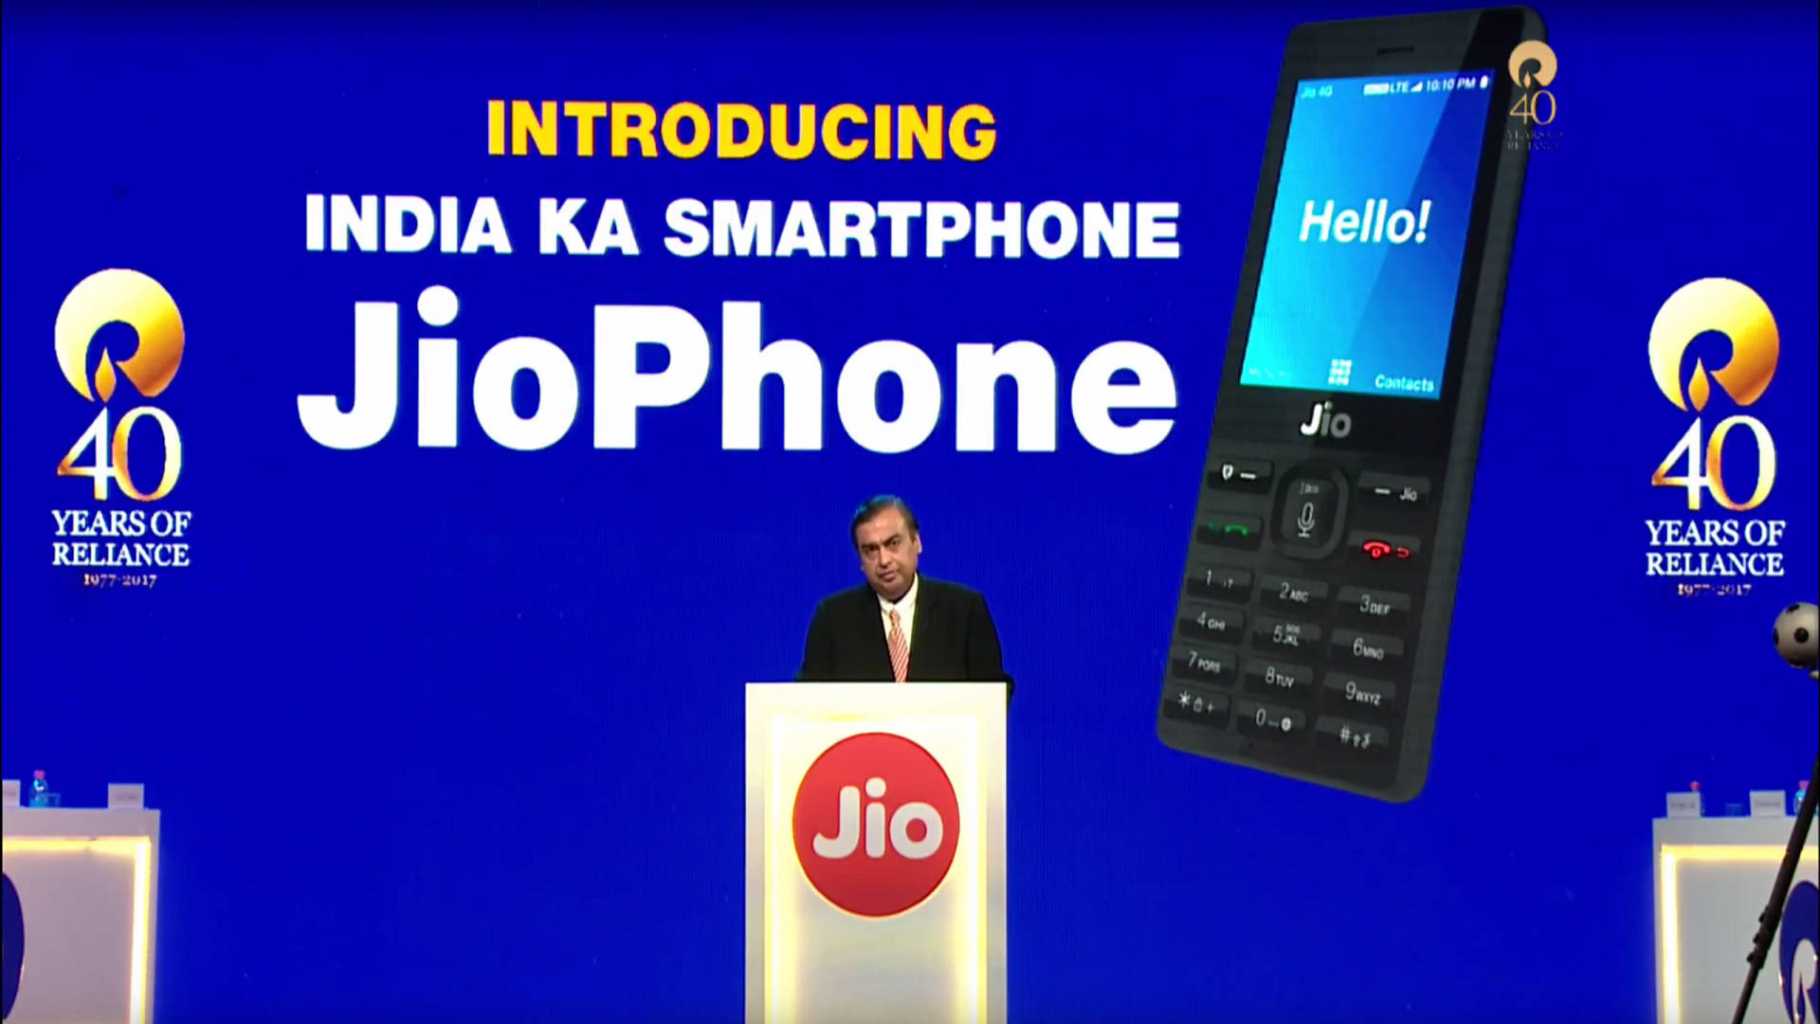 Reliance JioPhone announced with 4G VoLTE and Voice Assistant For an effective price of Rs 0